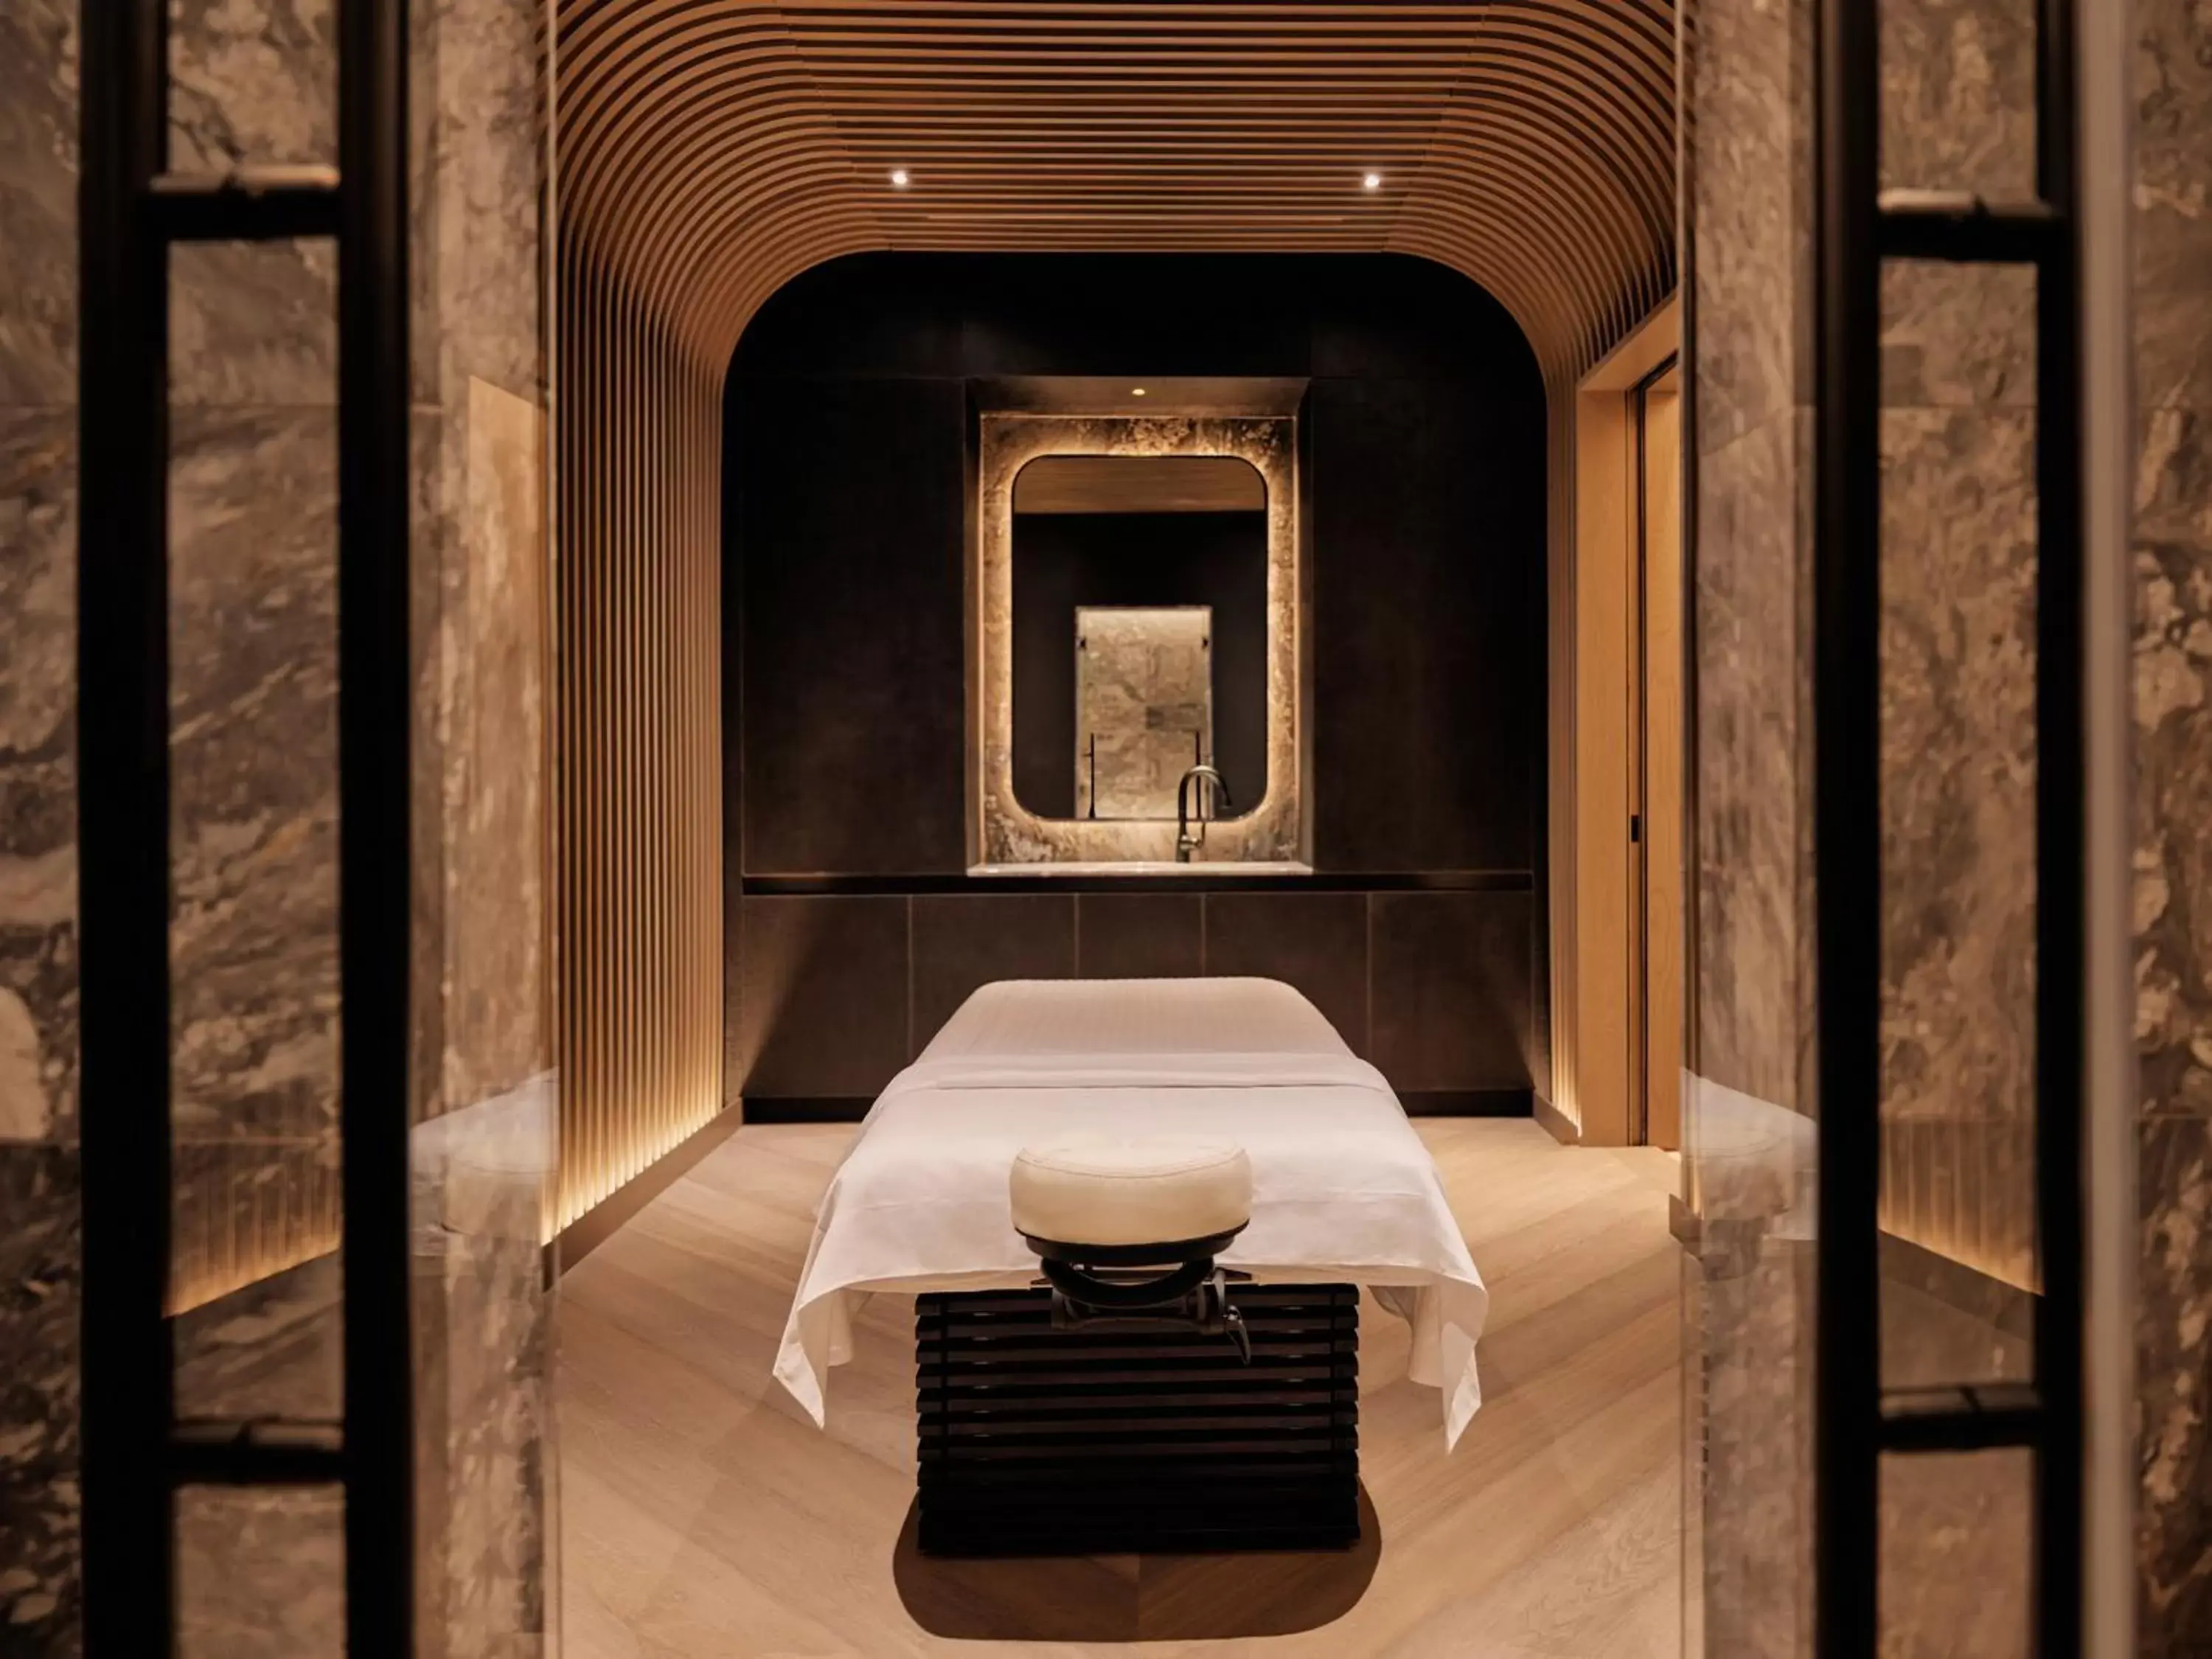 Spa and wellness centre/facilities in Equinox Hotel Hudson Yards New York City